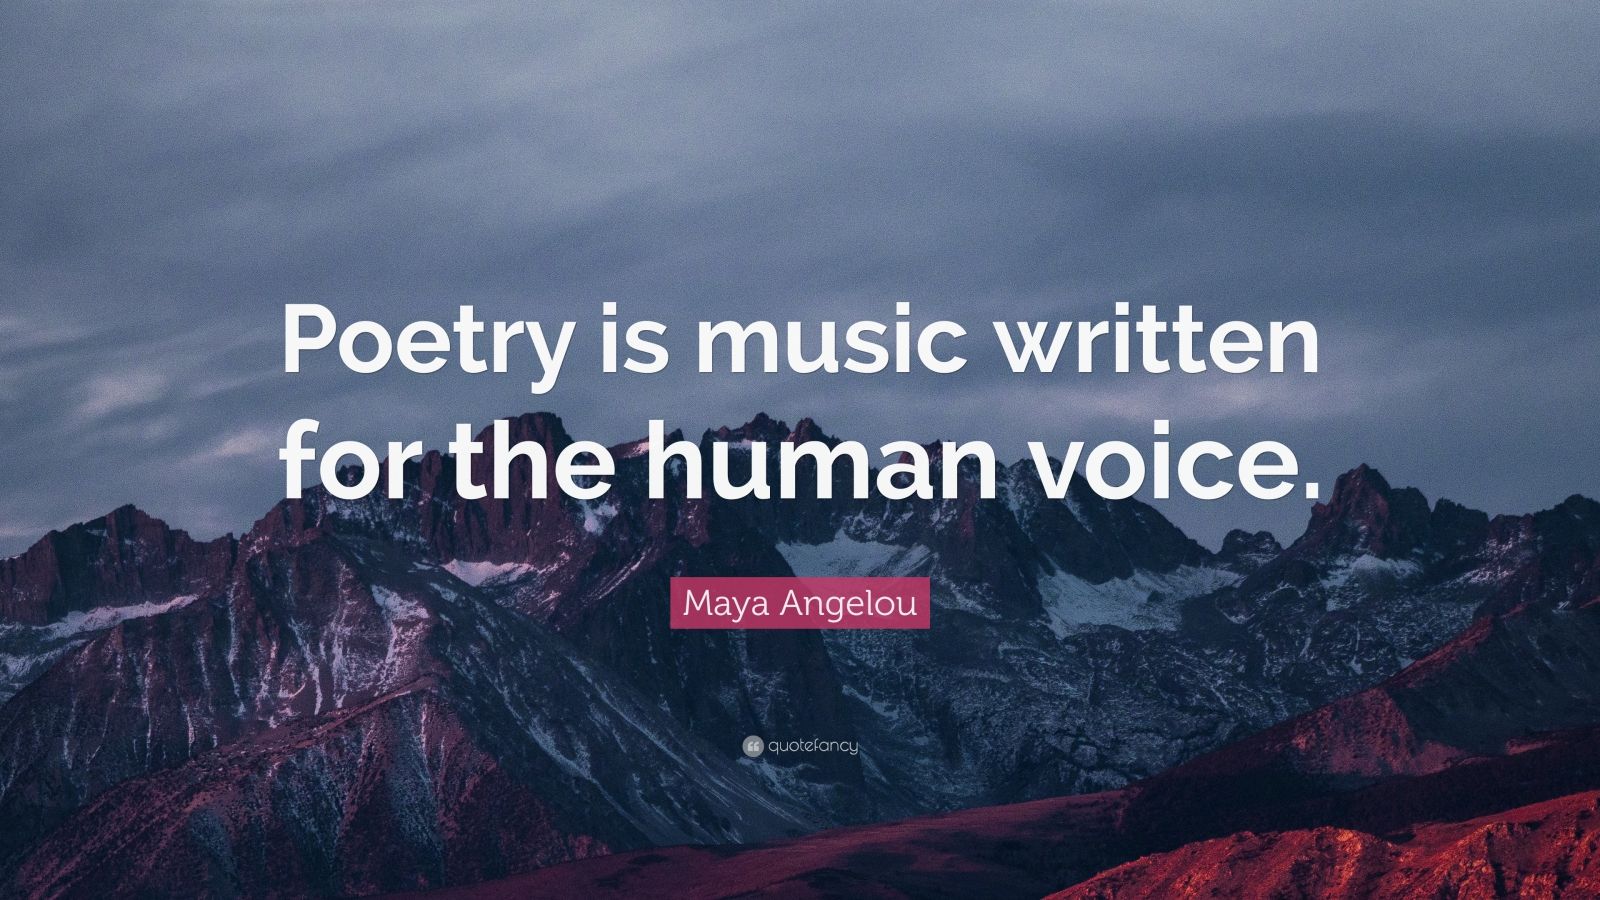 Maya Angelou Quote: "Poetry is music written for the human voice." (7 wallpapers) - Quotefancy